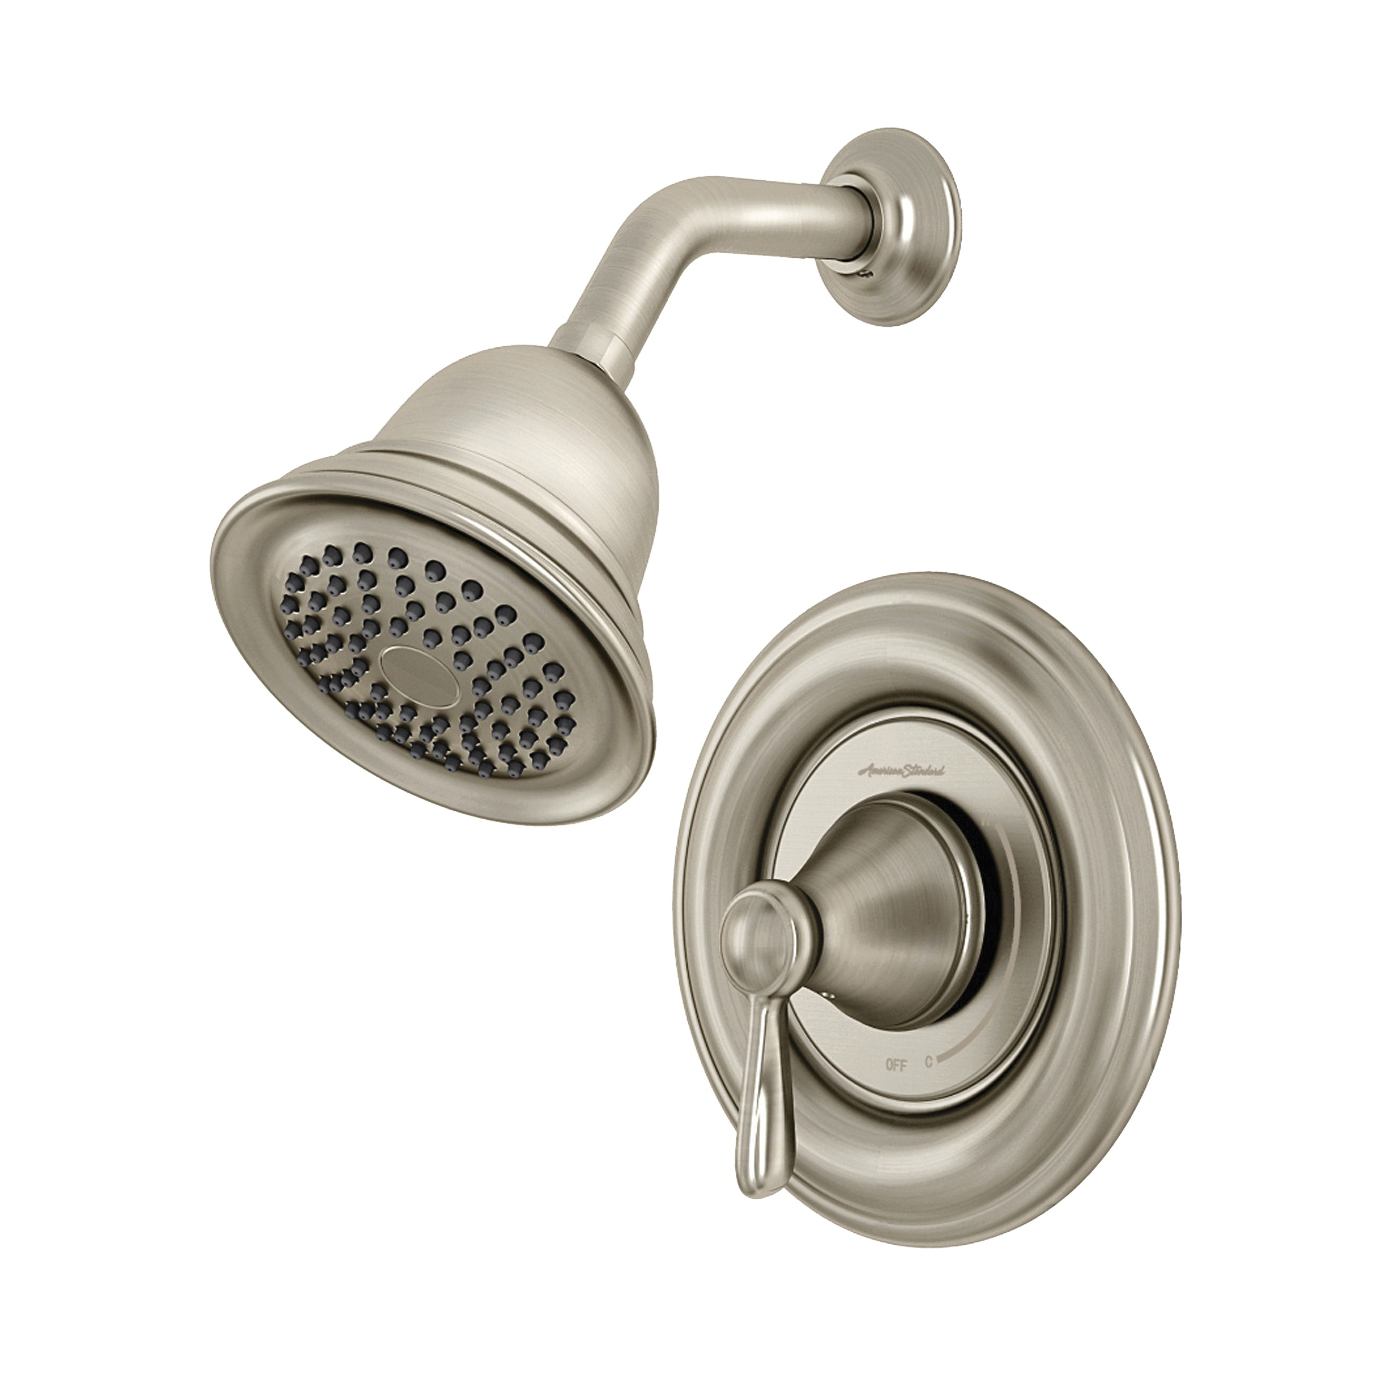 7262S Showerhead and Valve, 2 gpm, Brass, Brushed Nickel, Lever Handle